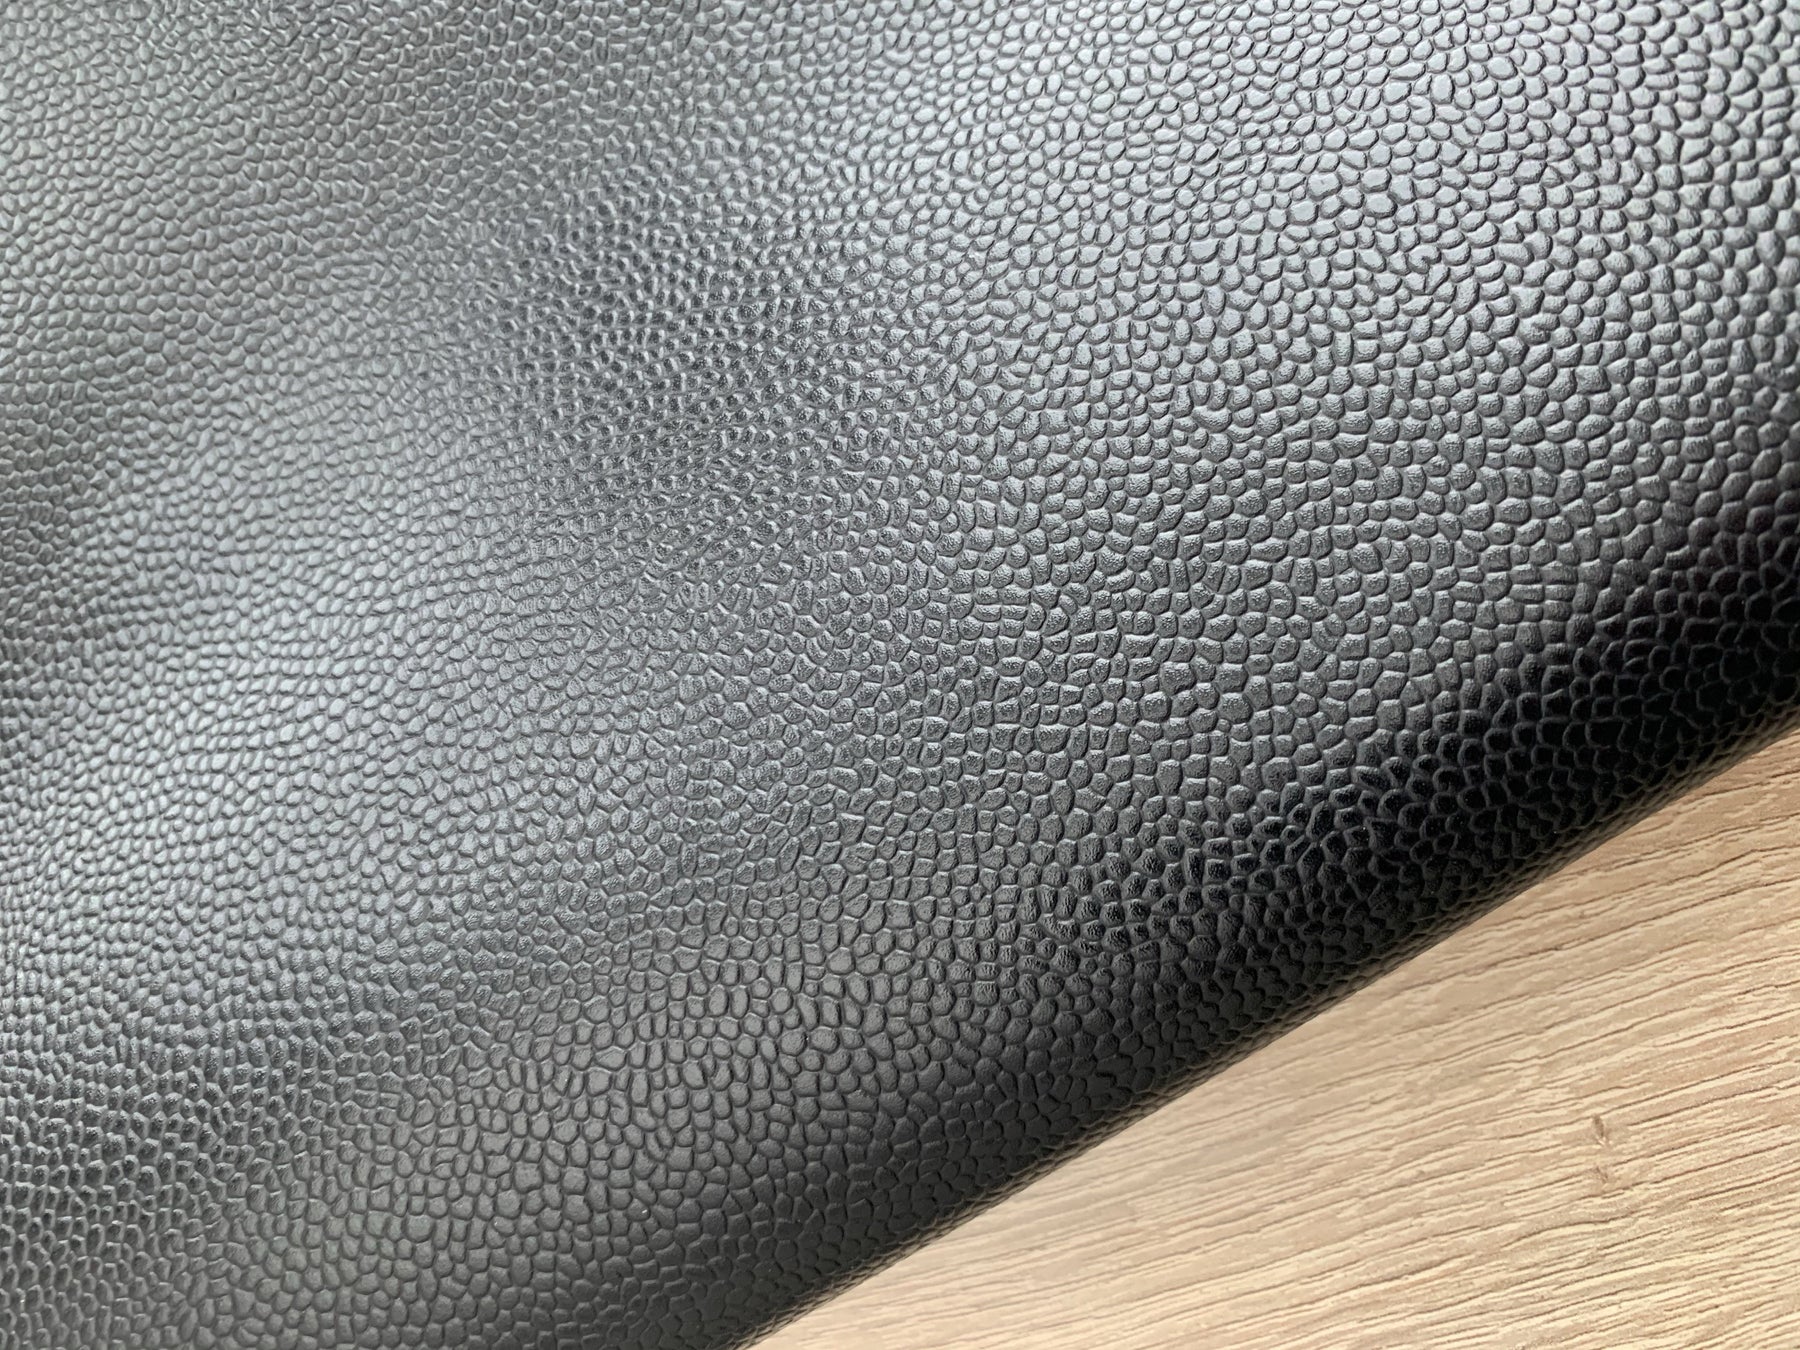 Ostrich Embossed Calfskin Leather Hides